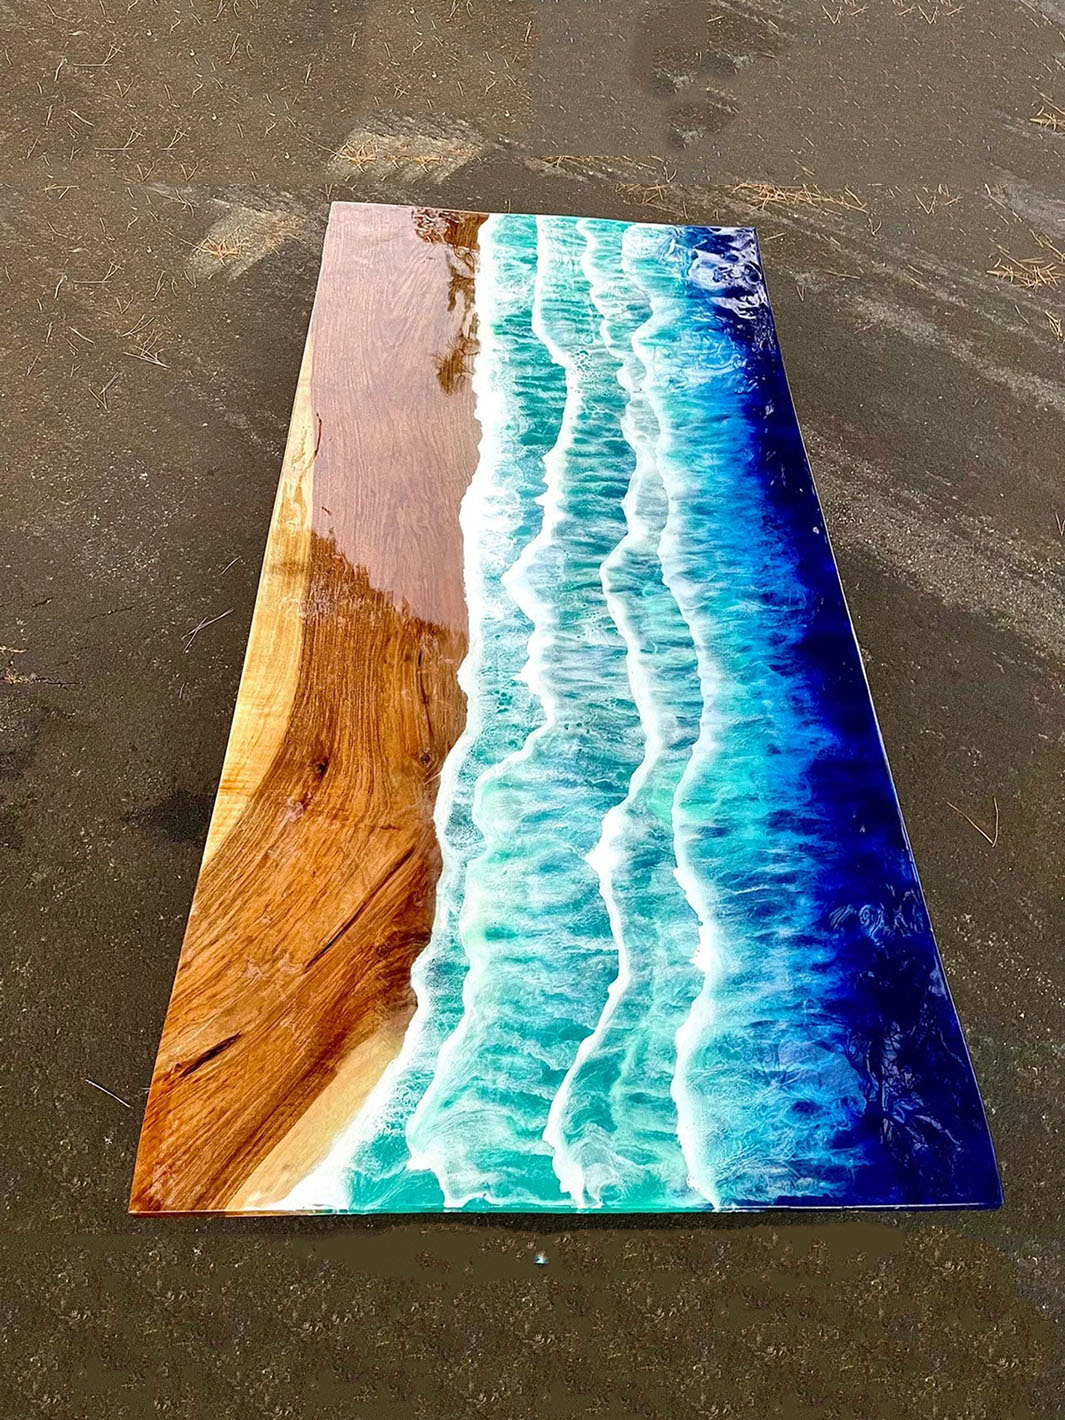 84"x42" Handcrafted Beach Inspired Elongated Epoxy Resin Dining Table Artsheedal Tables ART0140-4